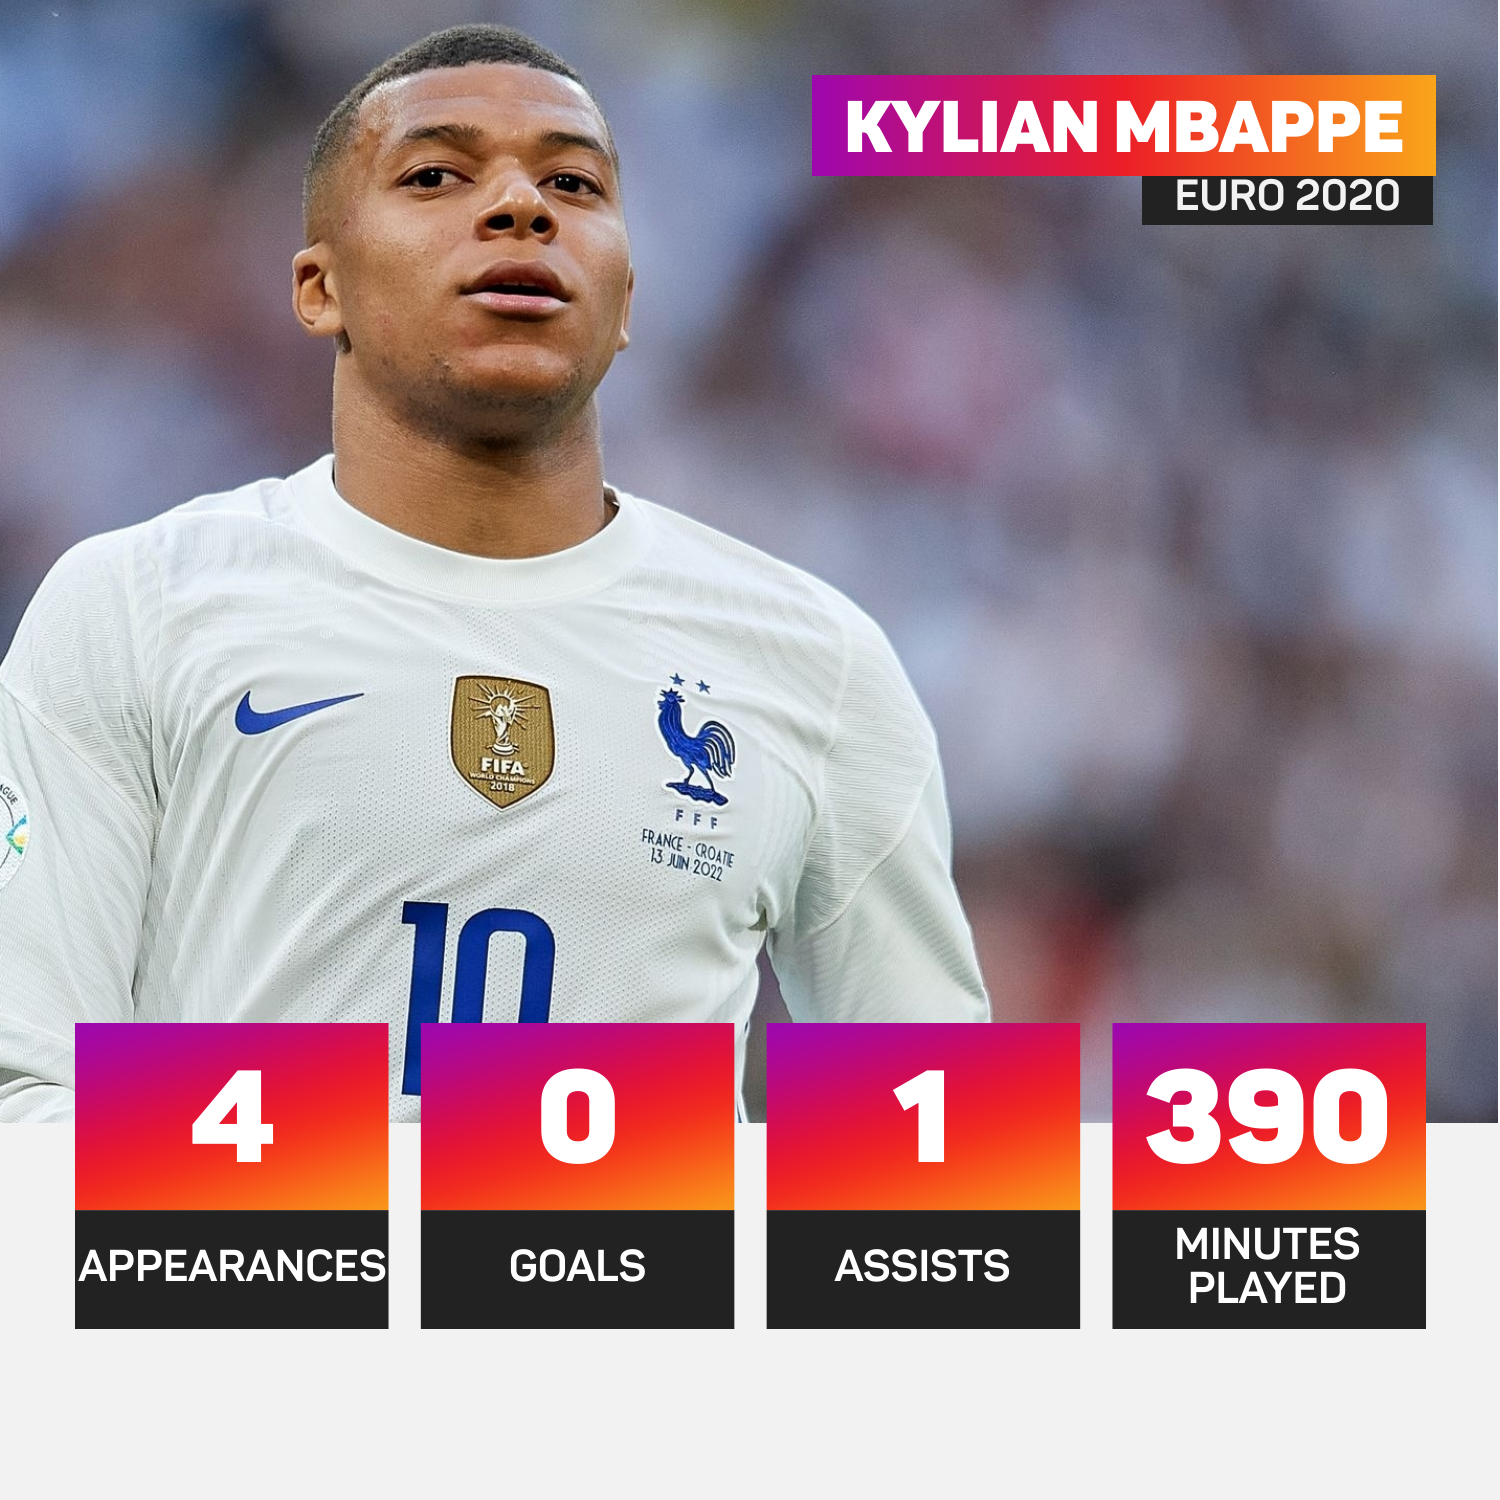 Kylian Mbappe failed to score in four appearances at Euro 2020